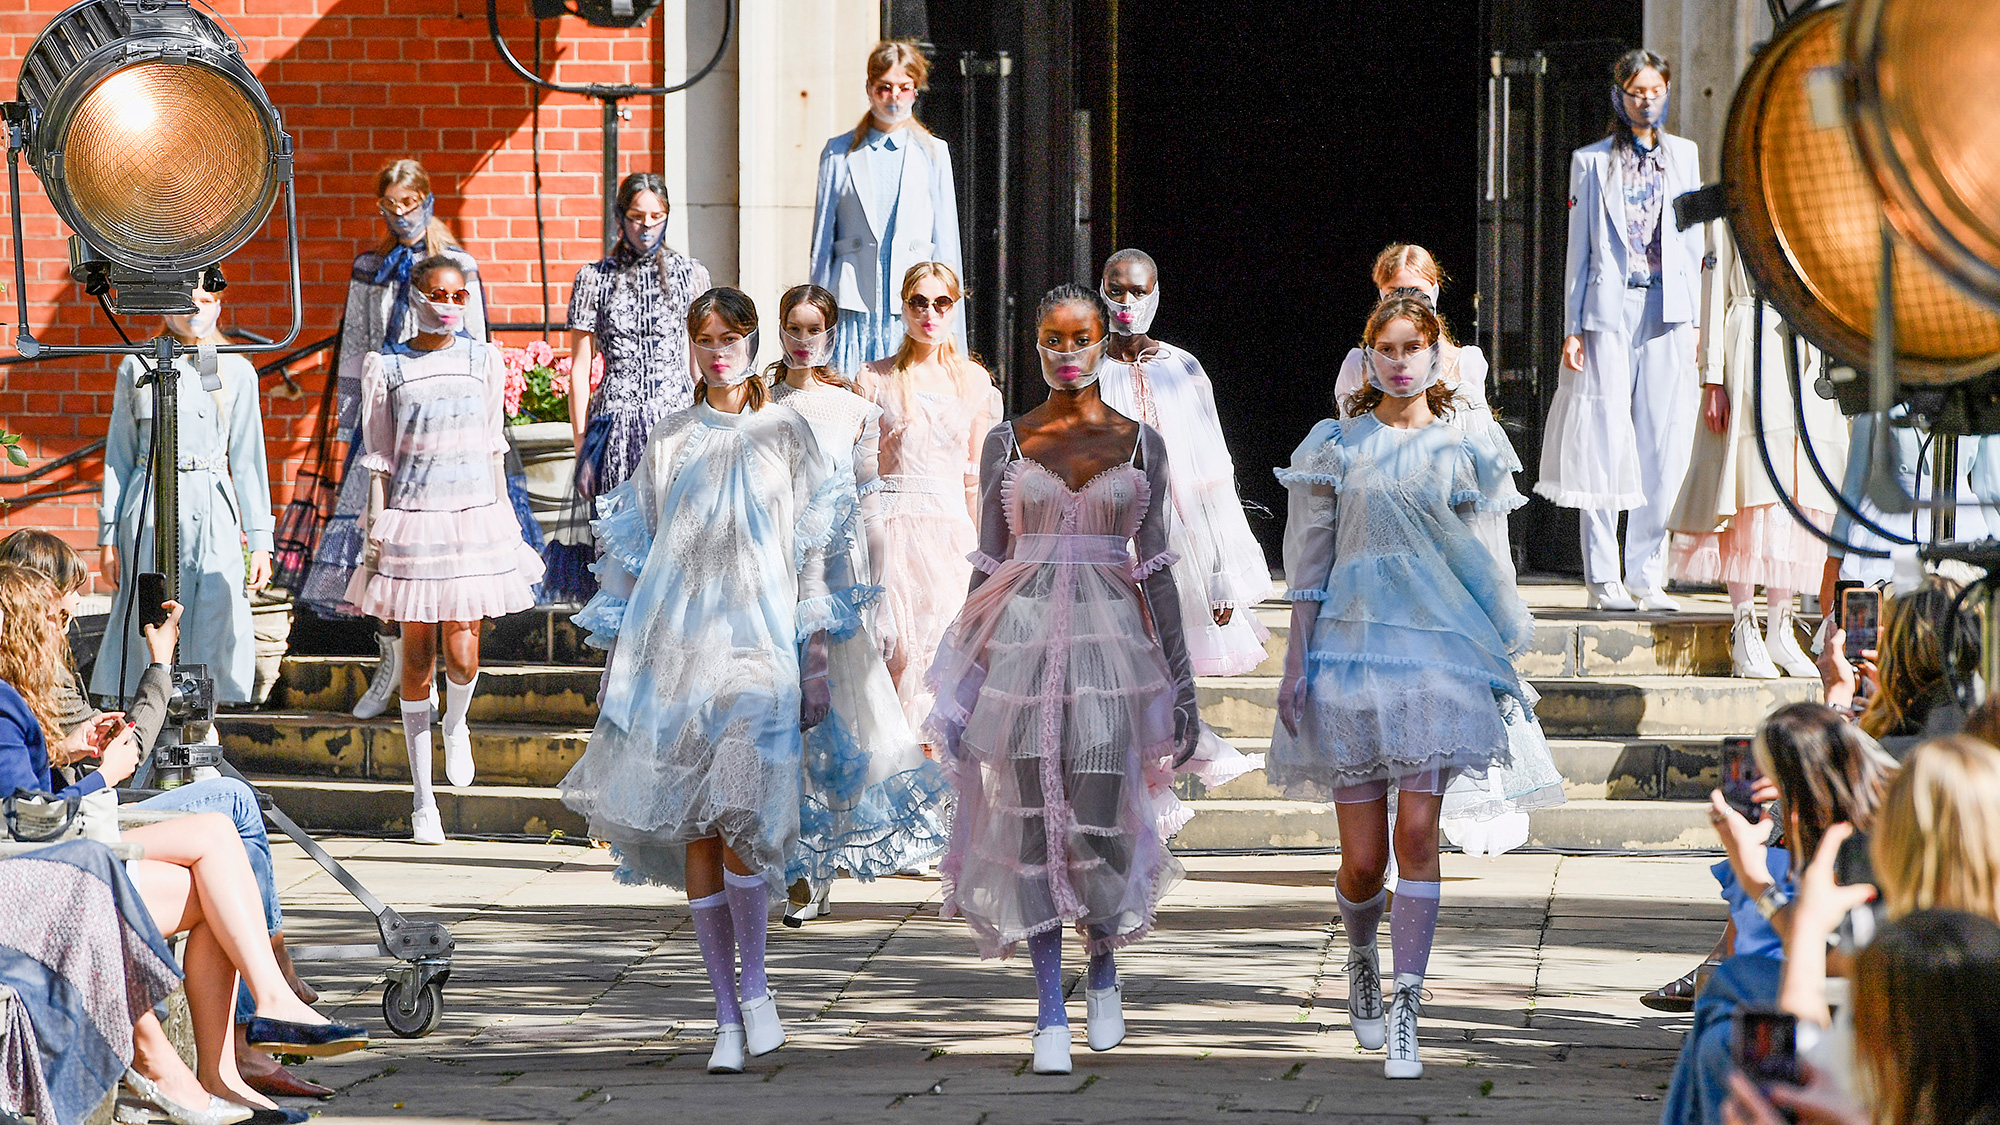 London Fashion Week will go ahead with no audience in February